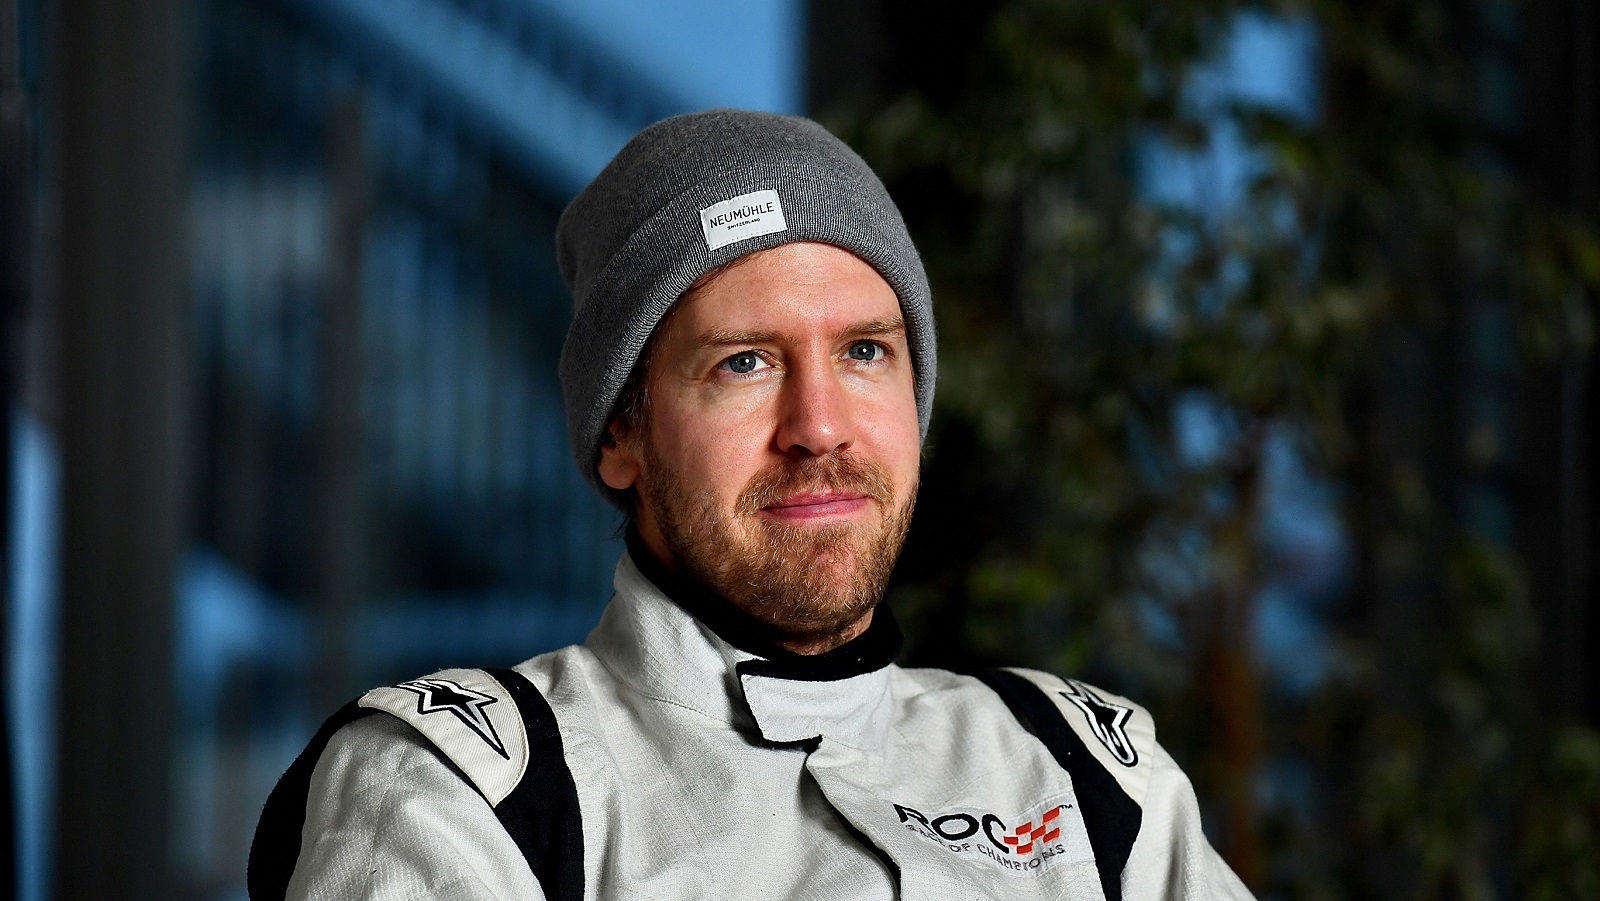 Sebastian Vettel of Germany during the Race of Champions on Feb. 4, 2022, in Pite Havsbad Pitea, Sweden. | ROC/Jerry Andre/Hasan Bratic/DeFodi Images via Getty Images